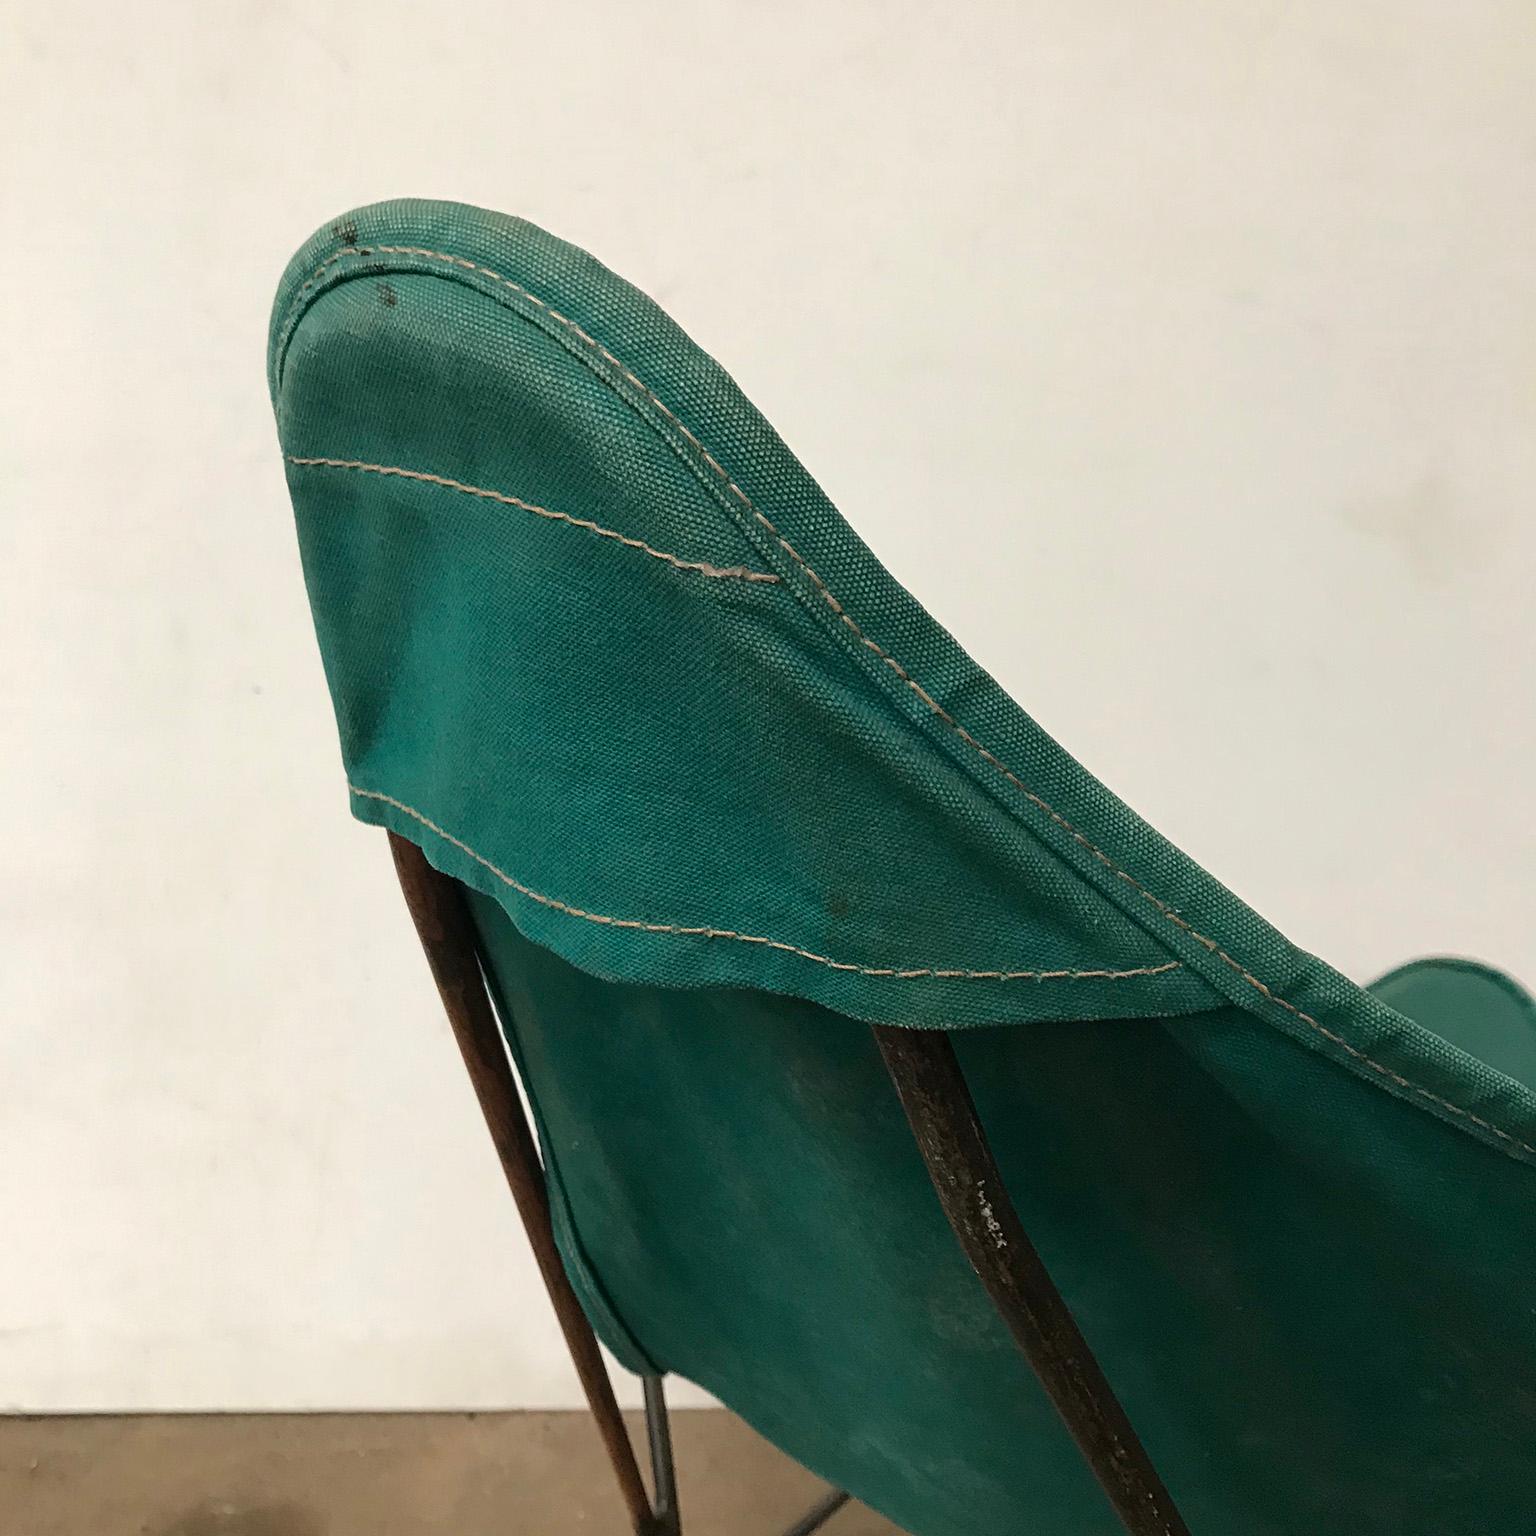 1947, Hardoy, Ferrari, Green Cover with Grey Base Butterfly Chair 5